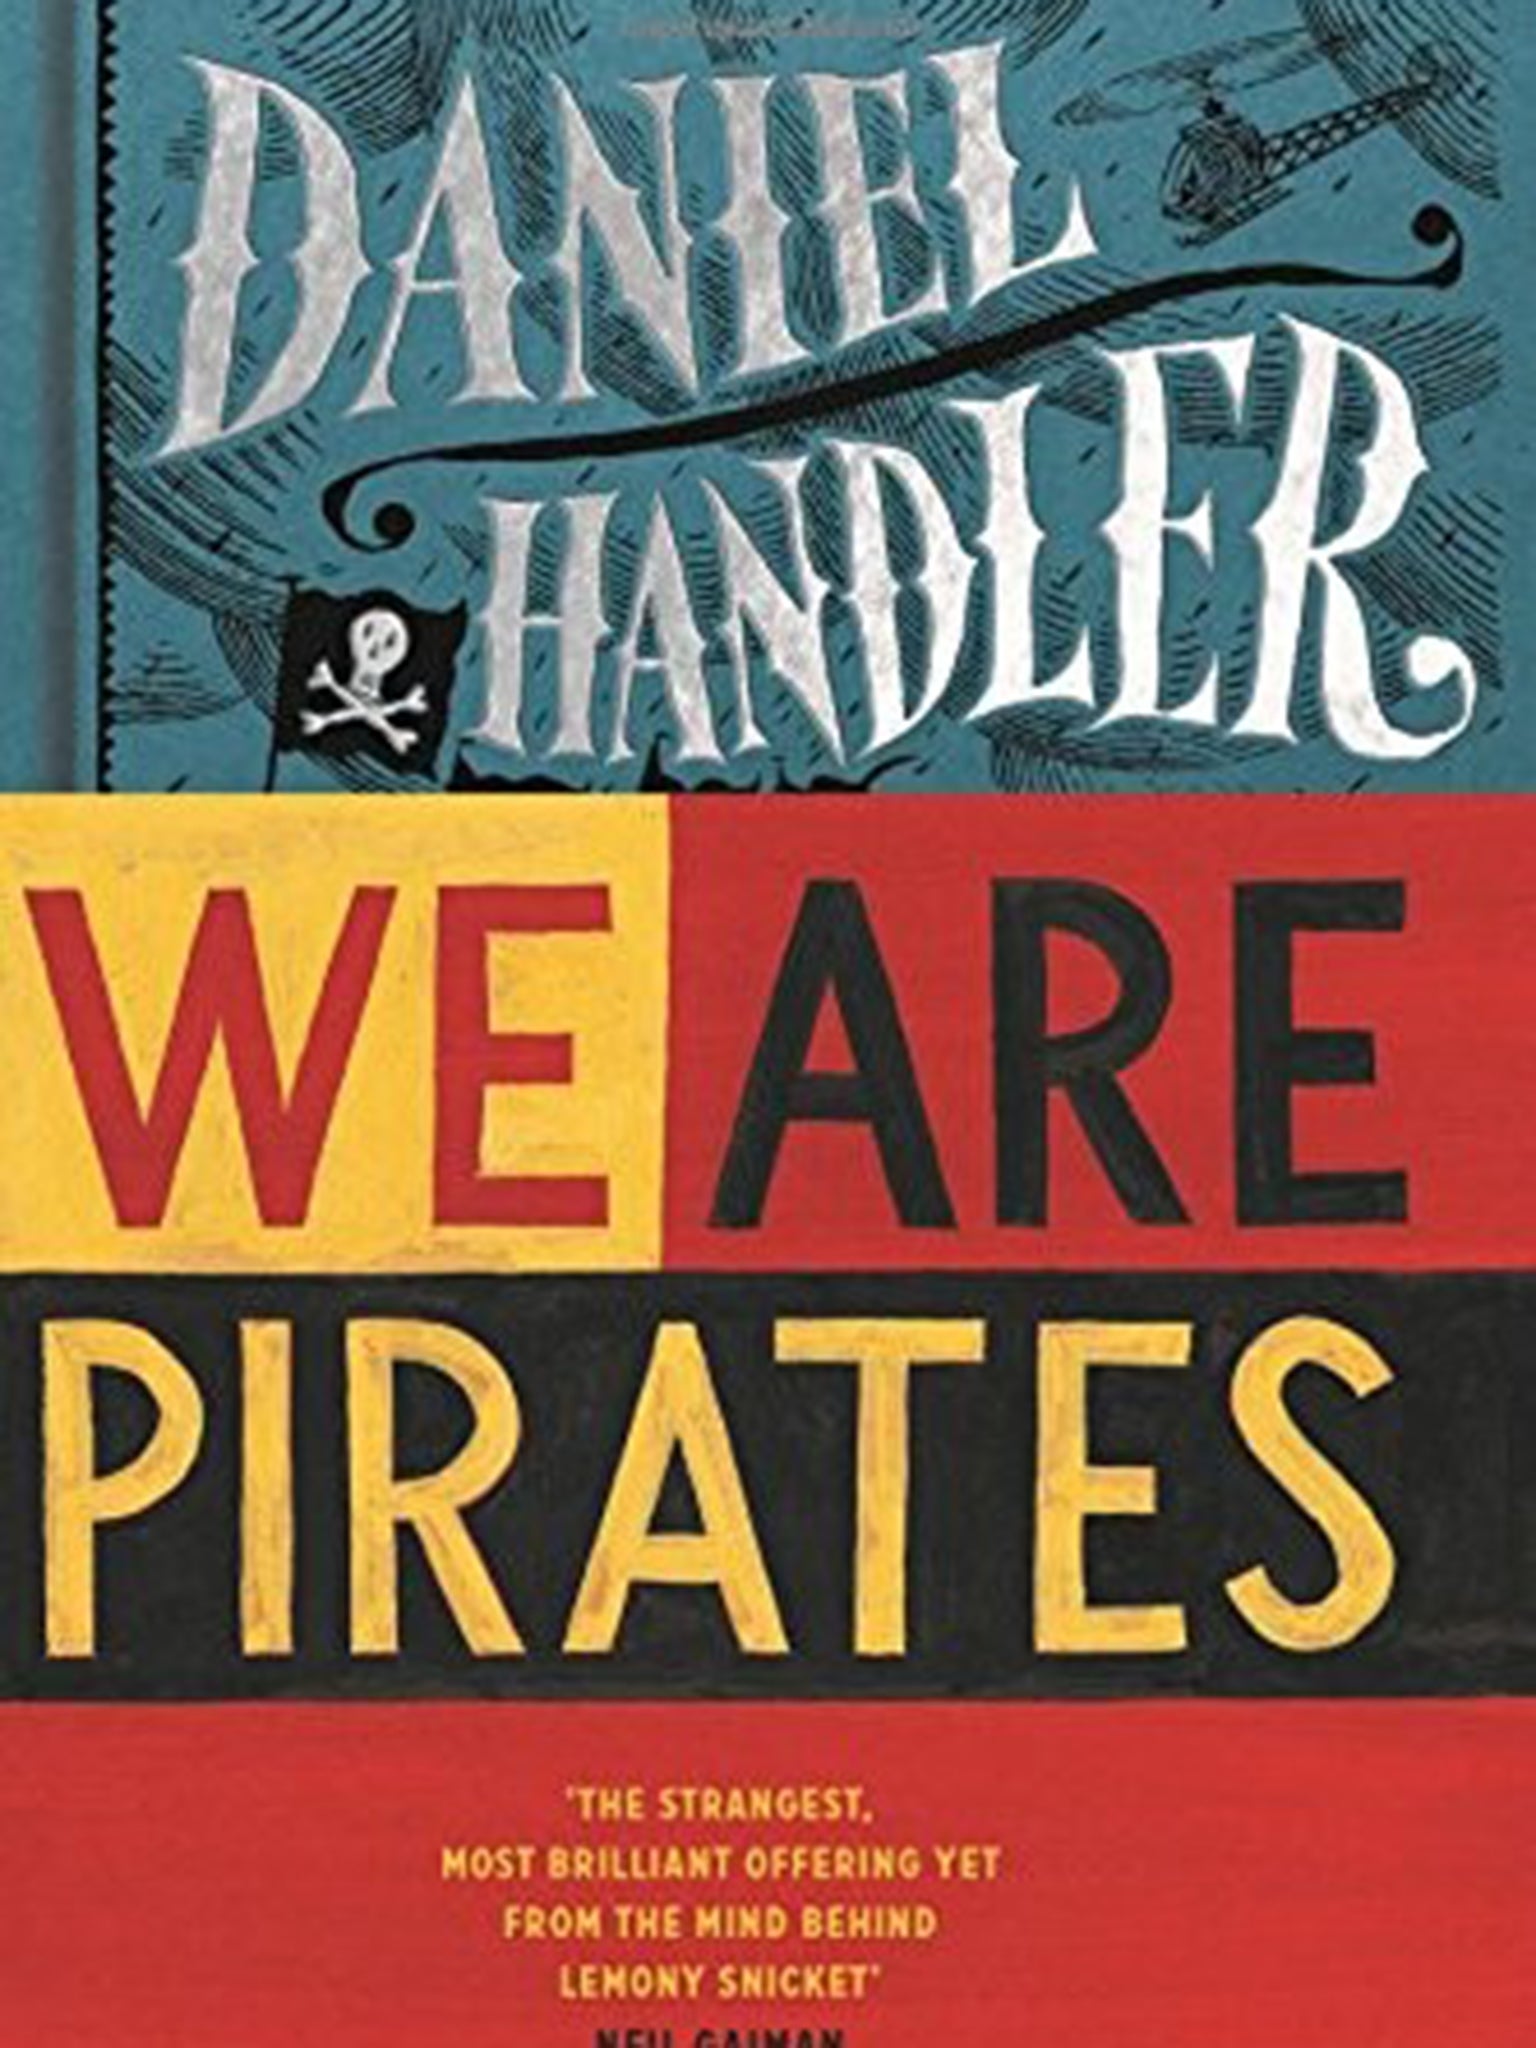 We are Pirates by Daniel Handler